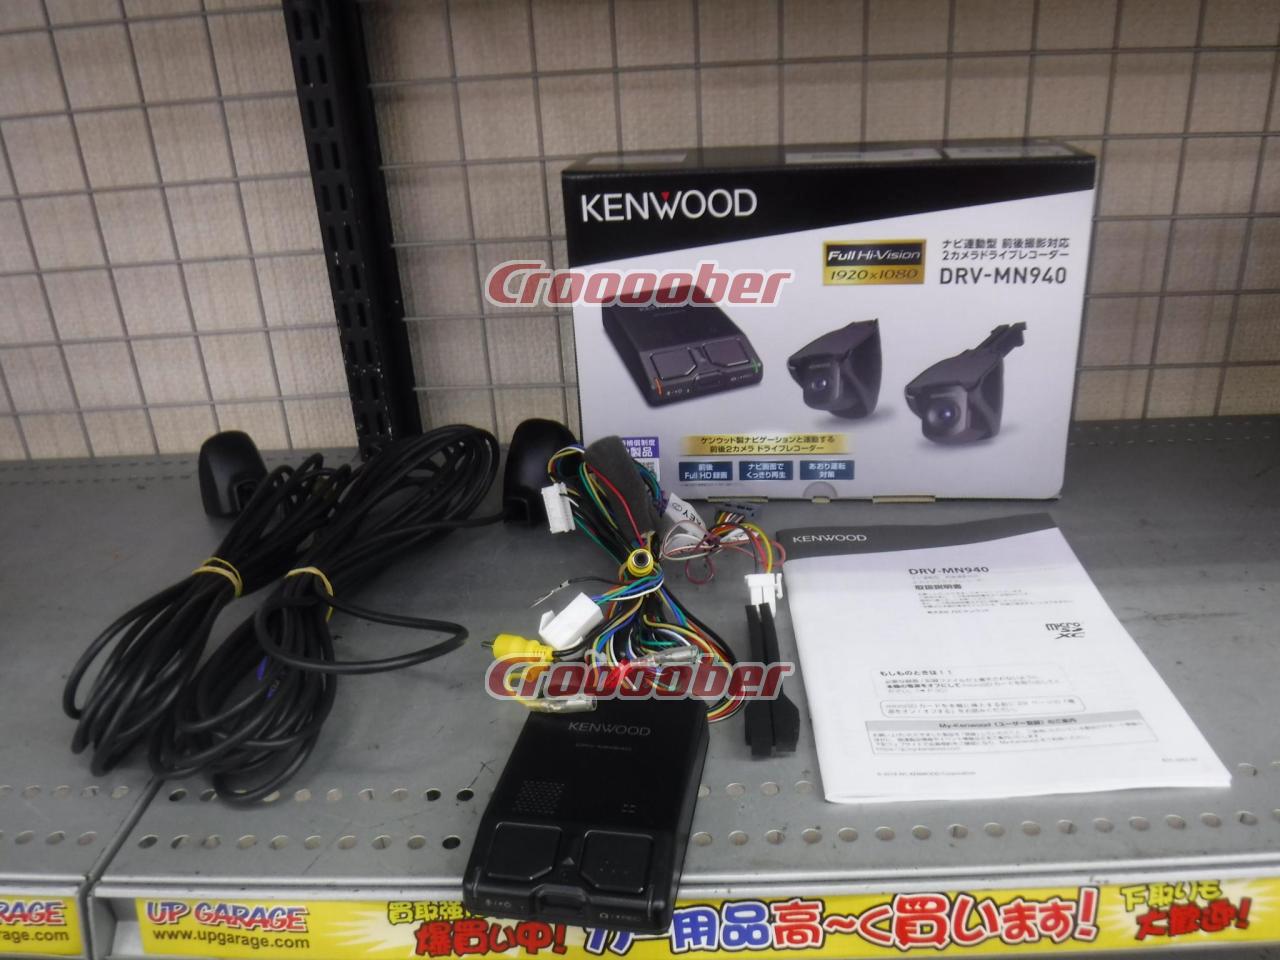 KENWOOD DRV-MN940 Drive Recorder For Pre- And Post-shooting Linked